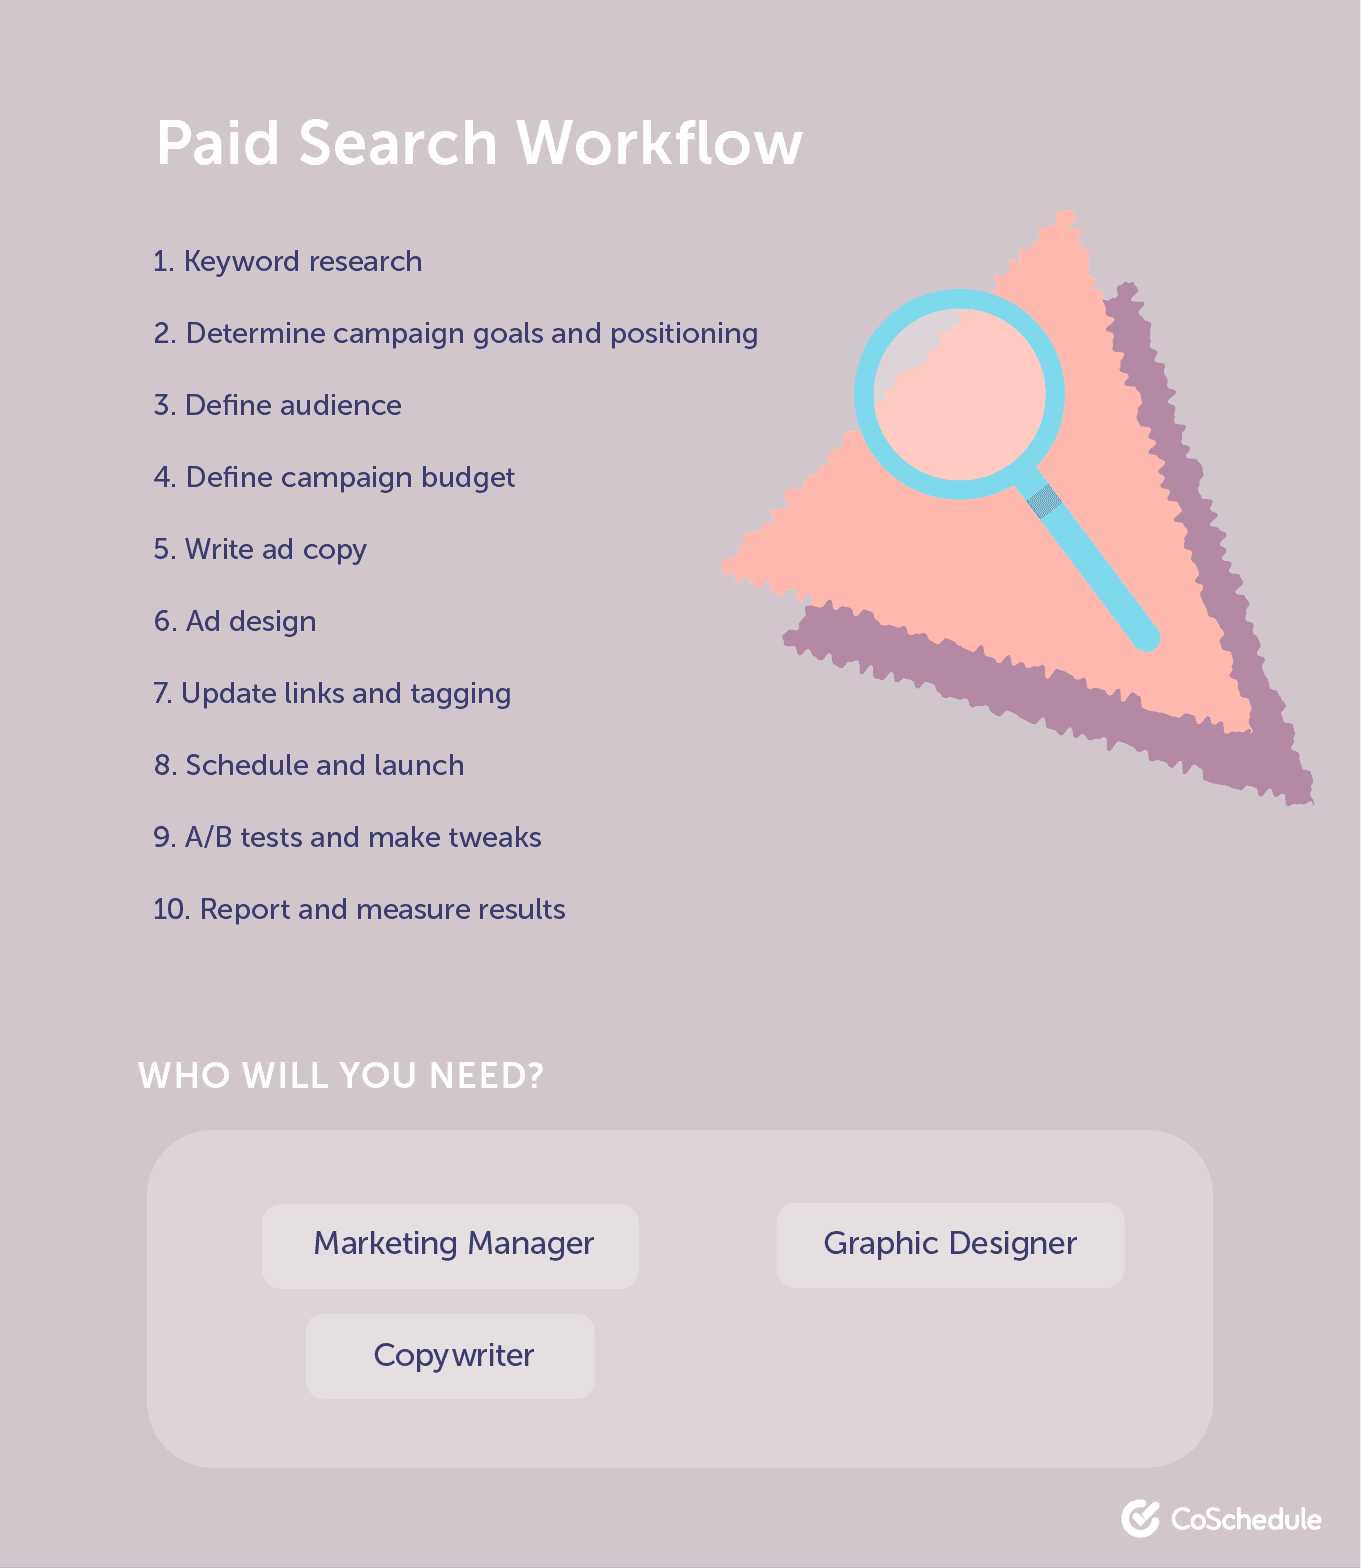 Paid search workflow example